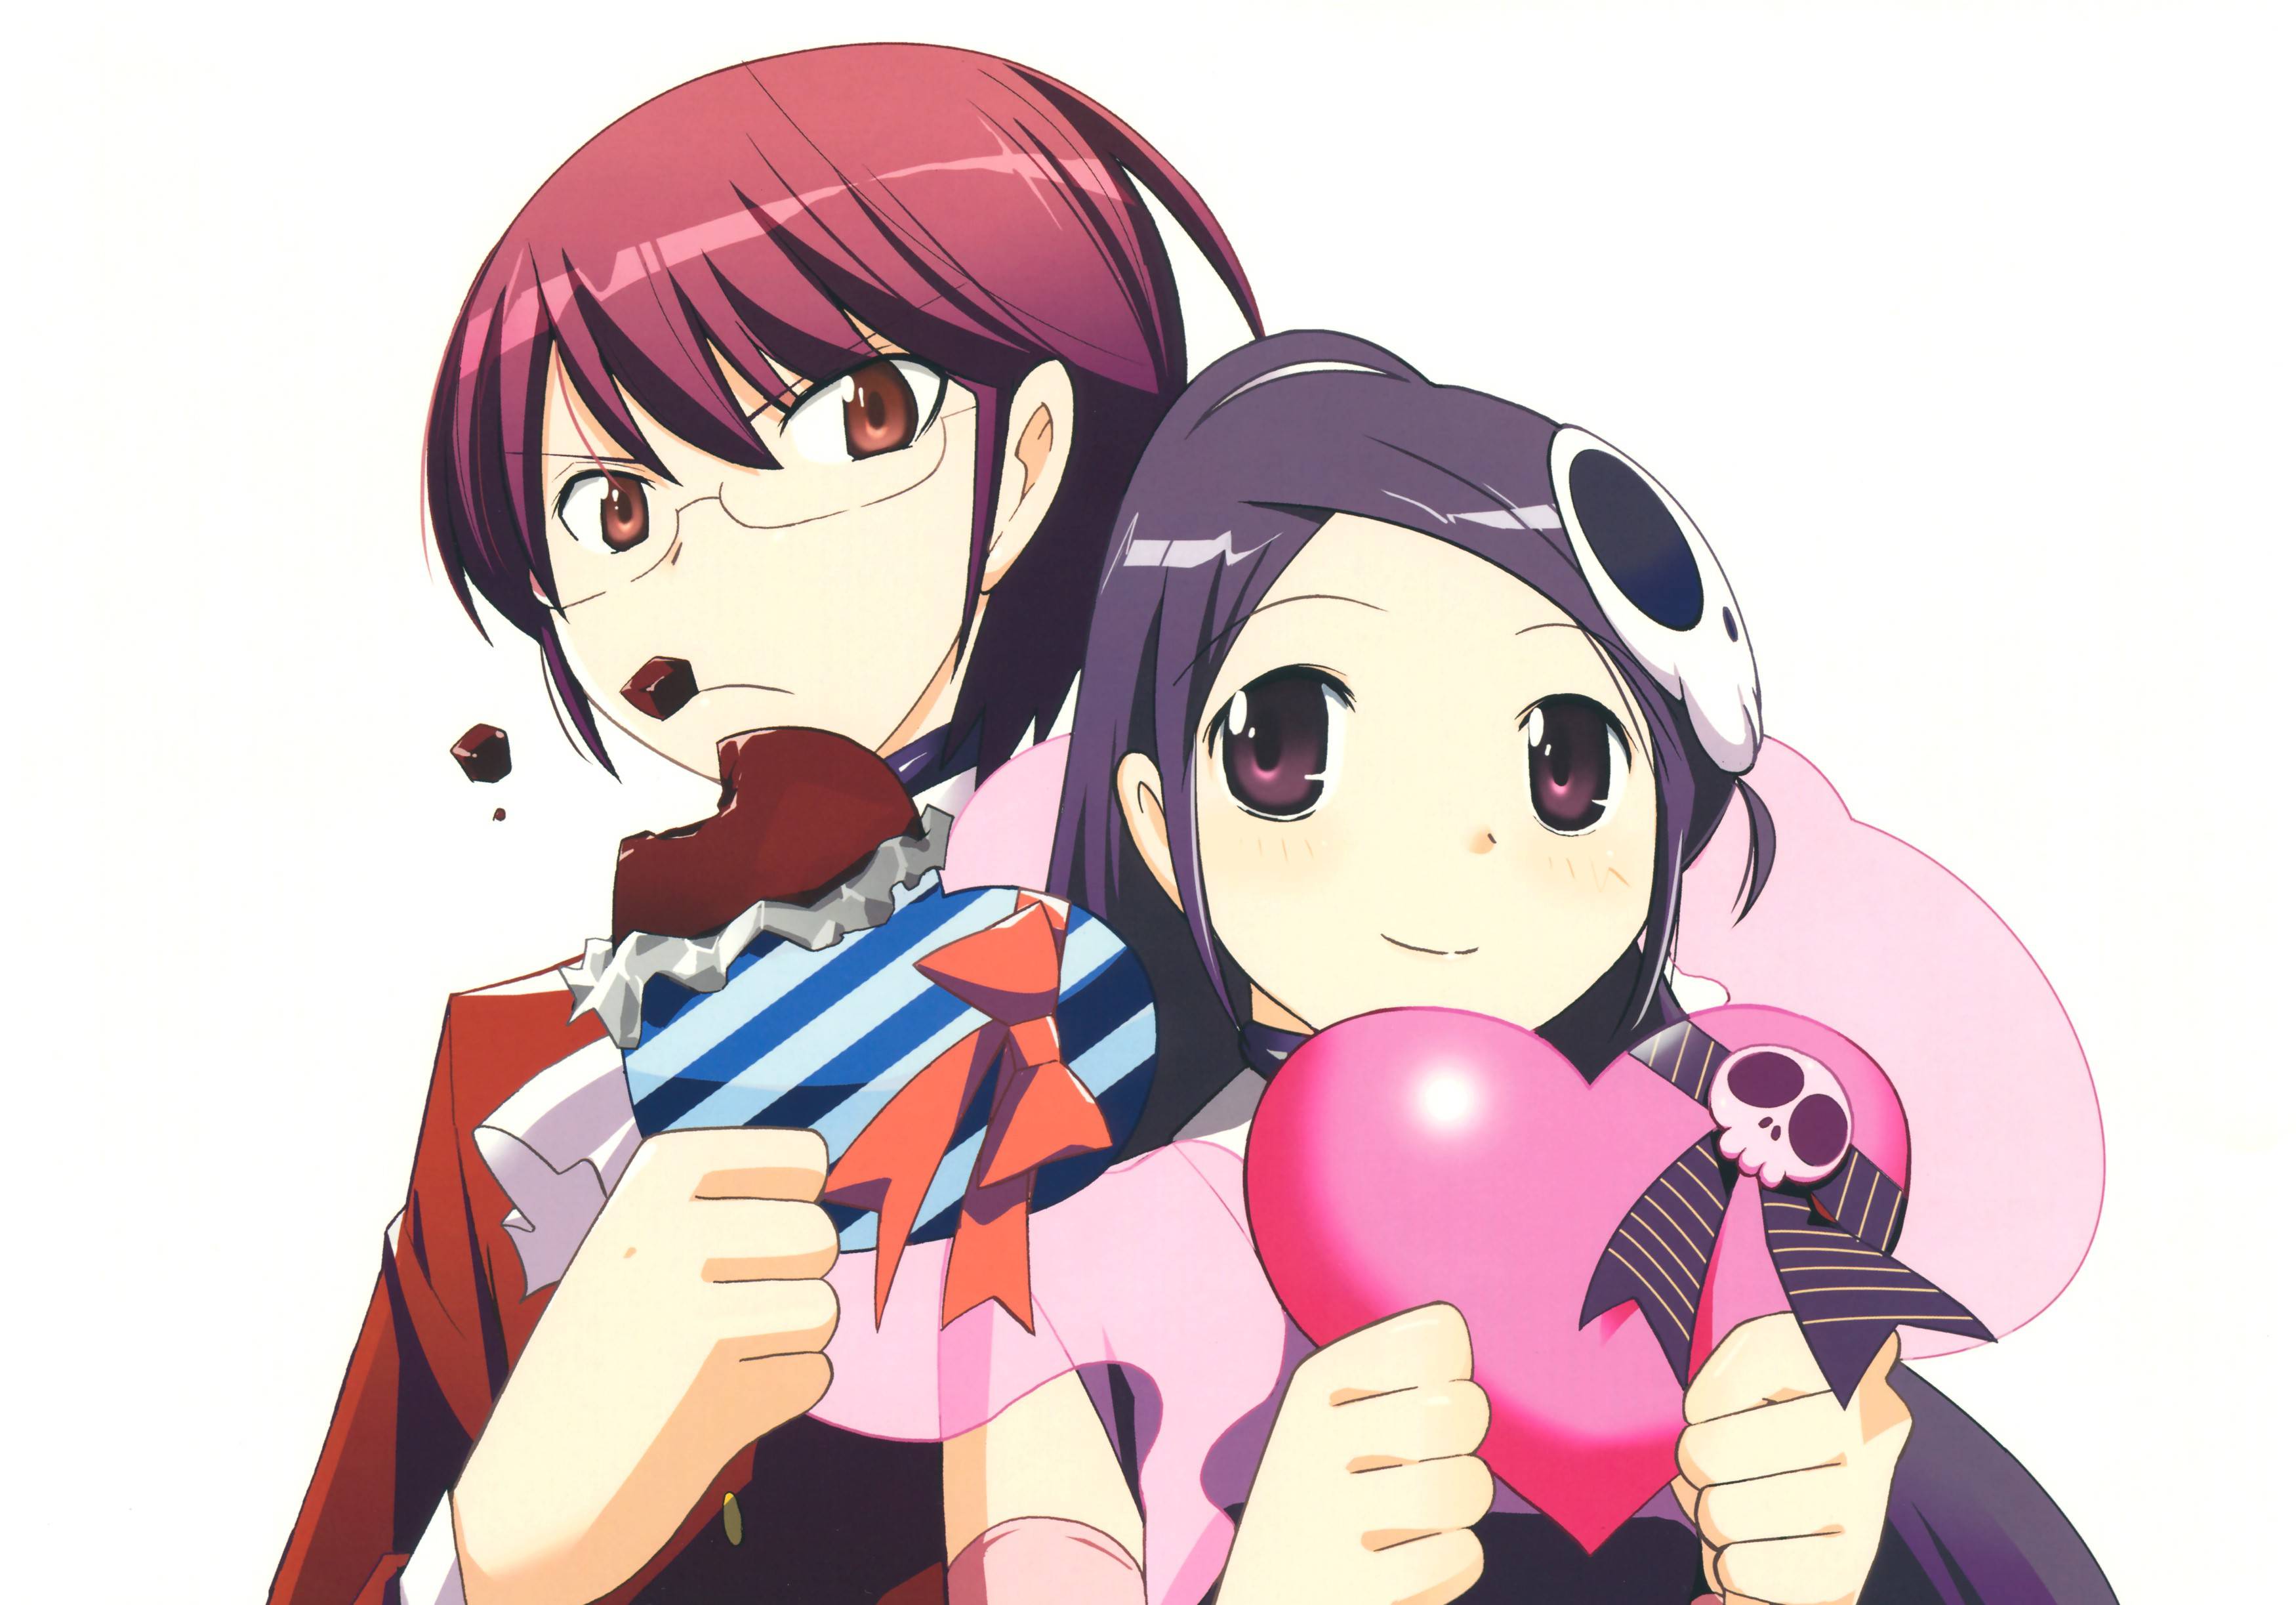 The world god only knows wallpaper - - High Quality and other